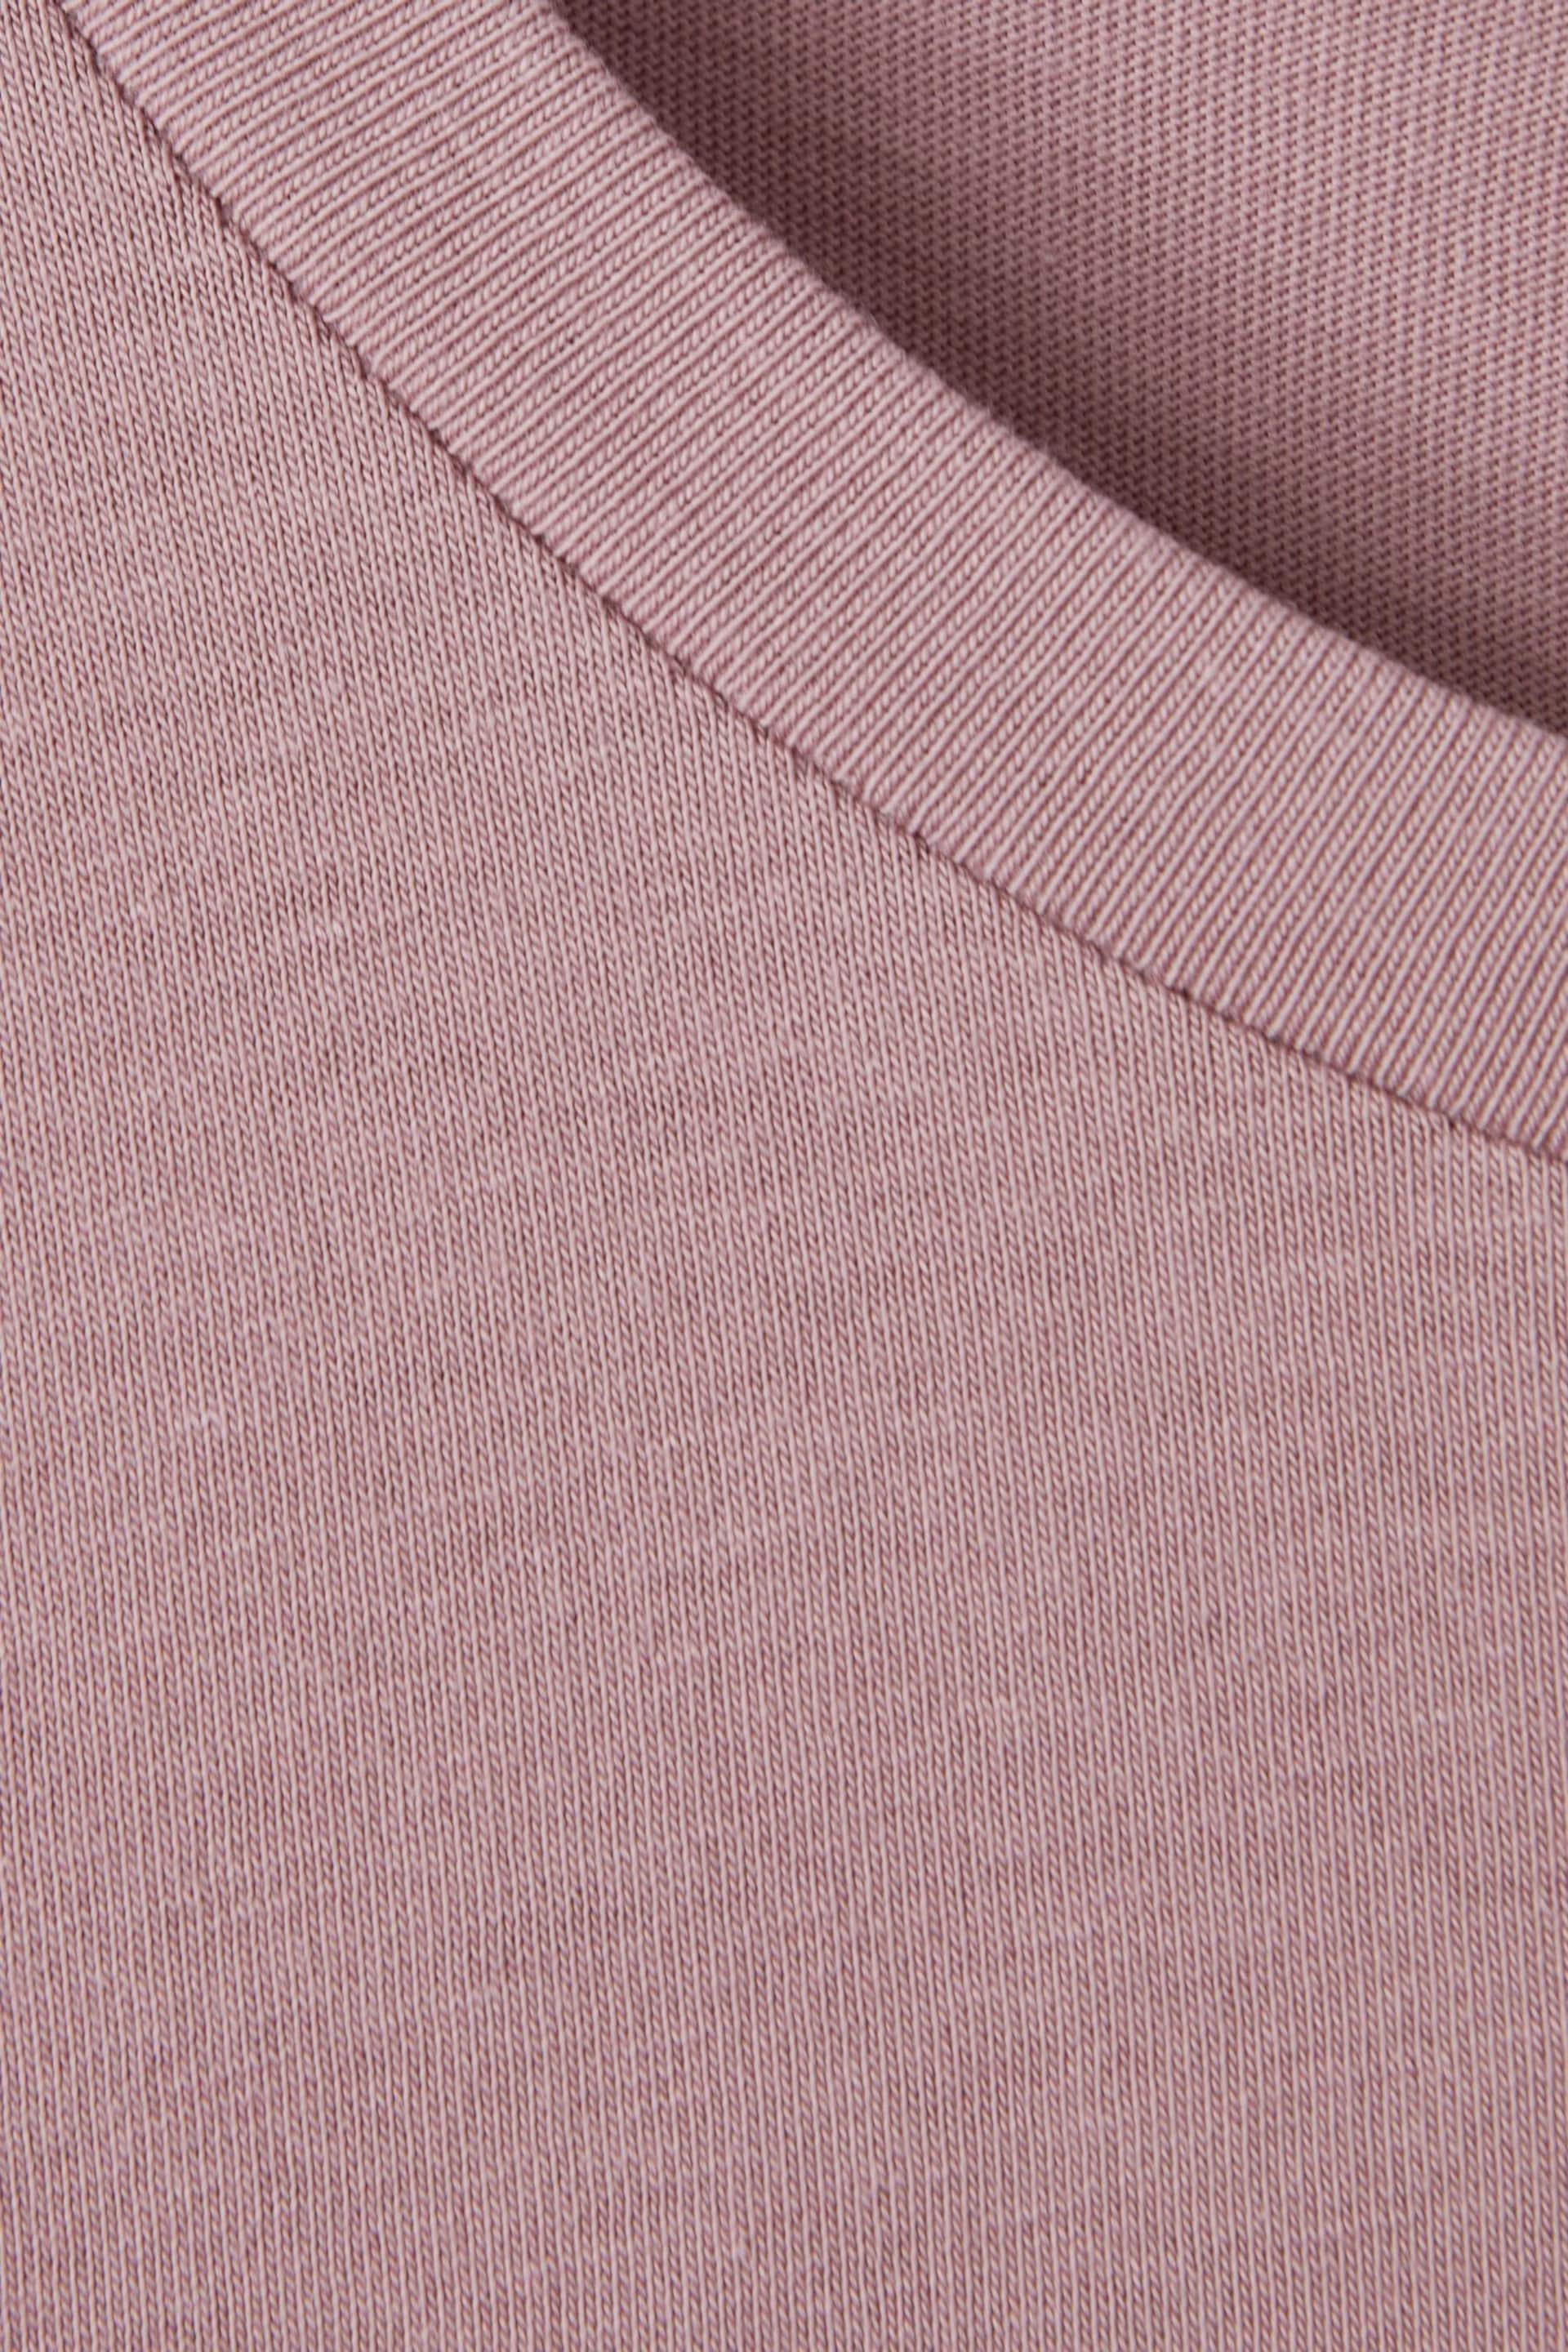 Reiss Dusty Rose Bless Cotton Crew Neck T-Shirt - Image 6 of 6